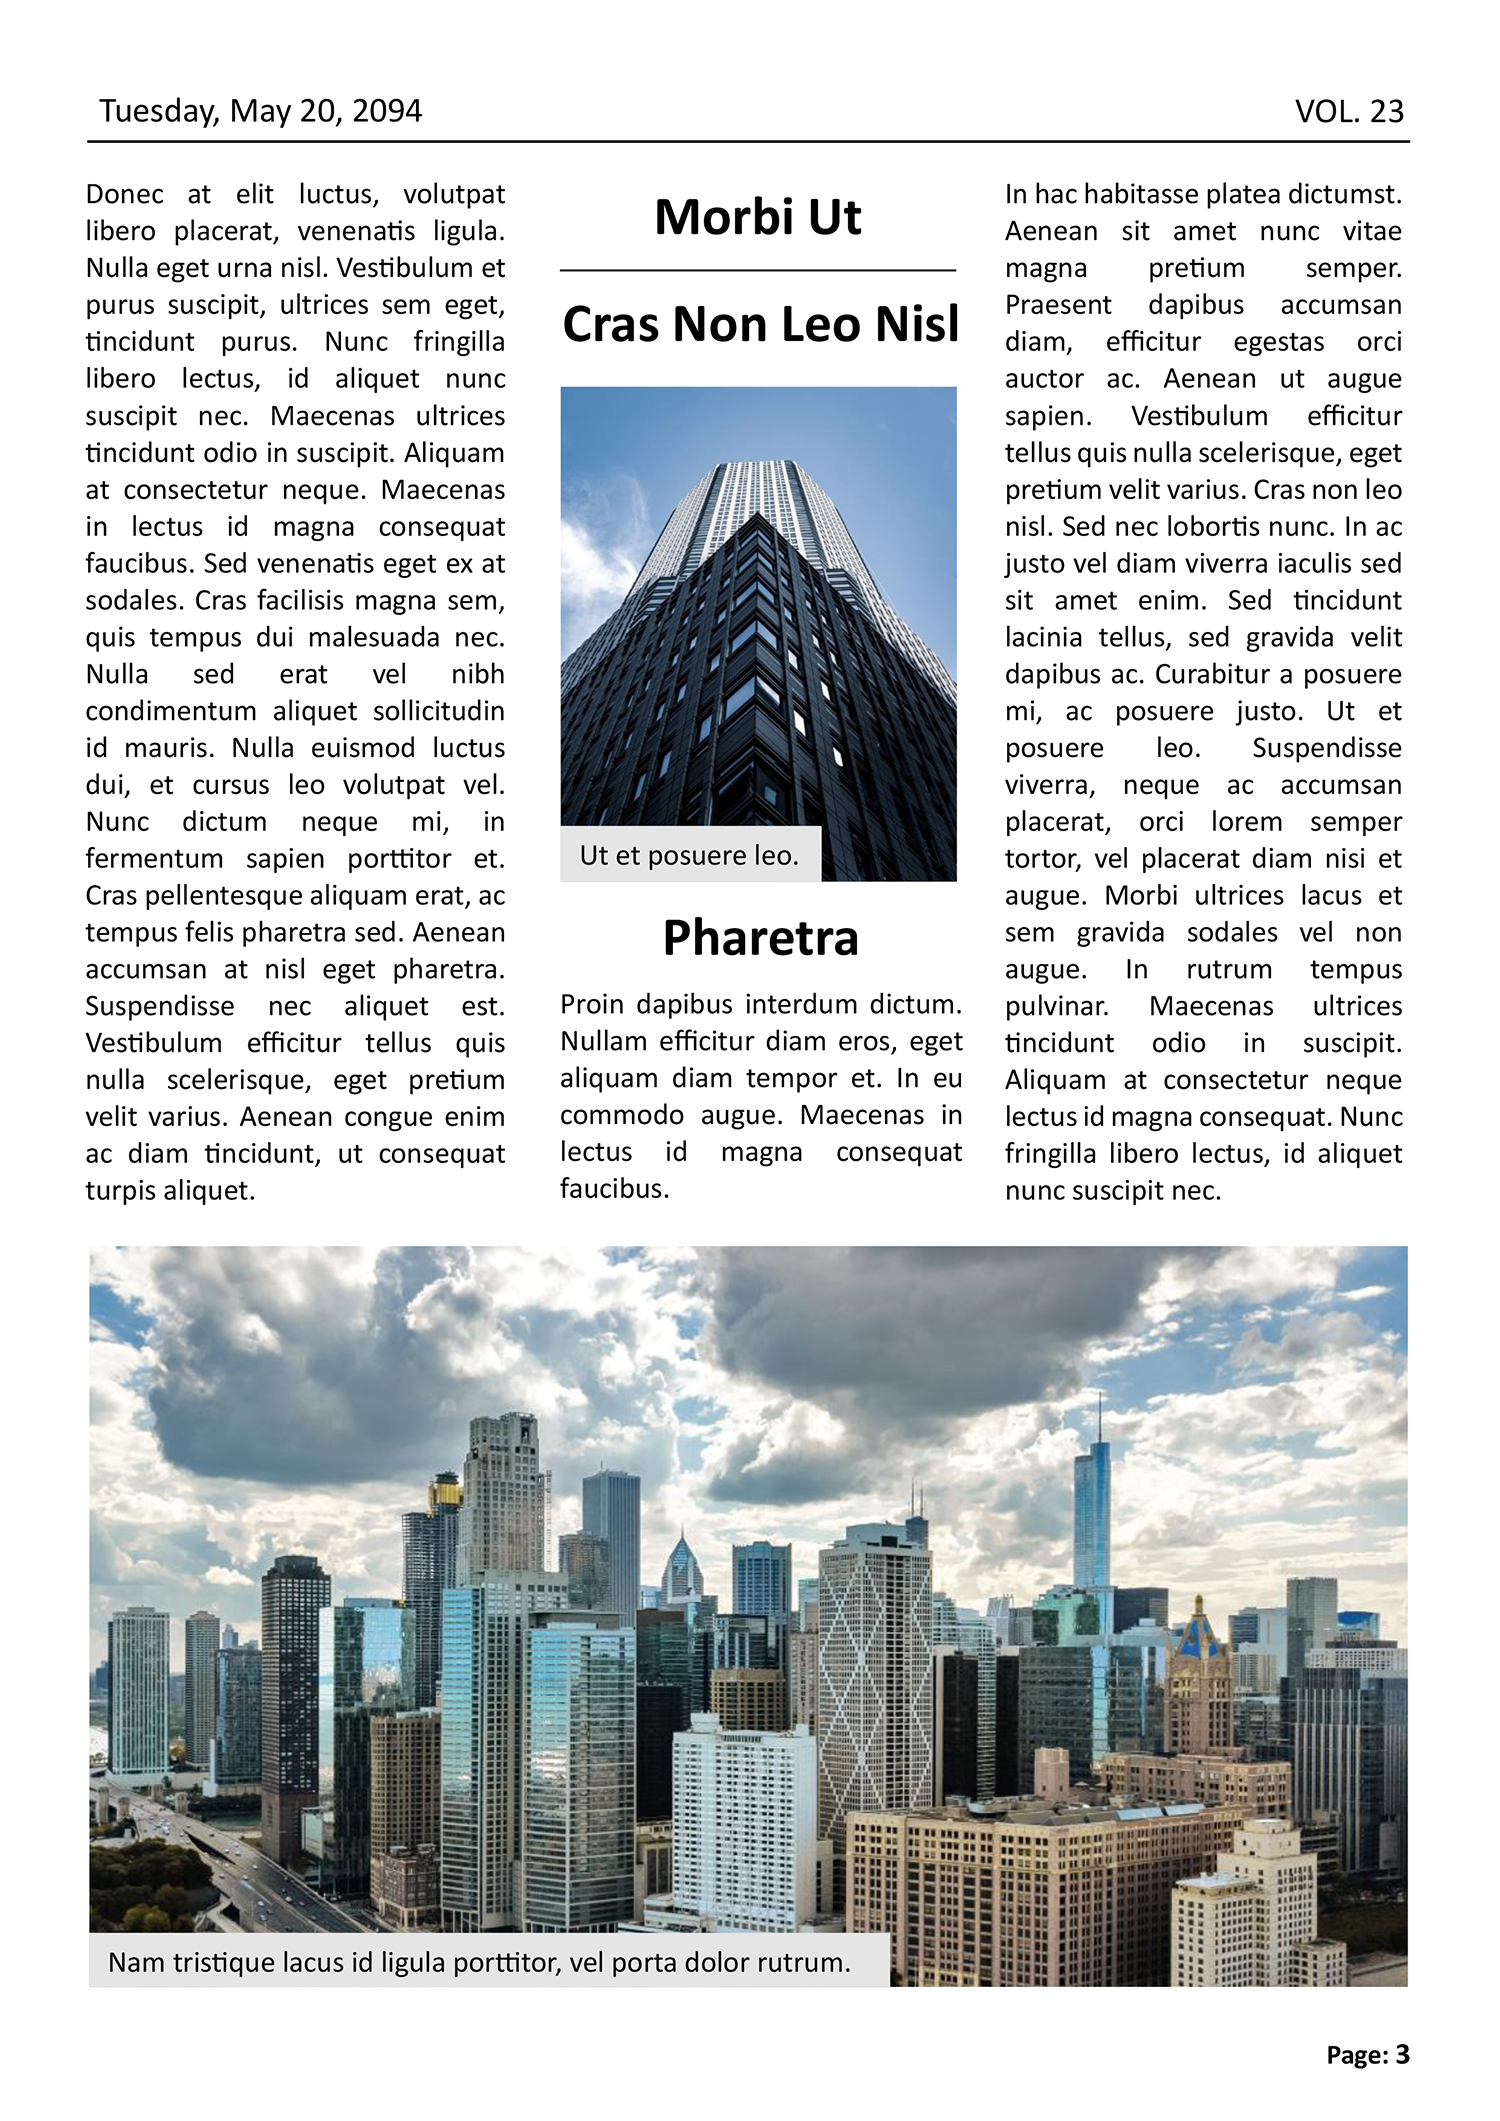 New York Times Newspaper Template - Page 03